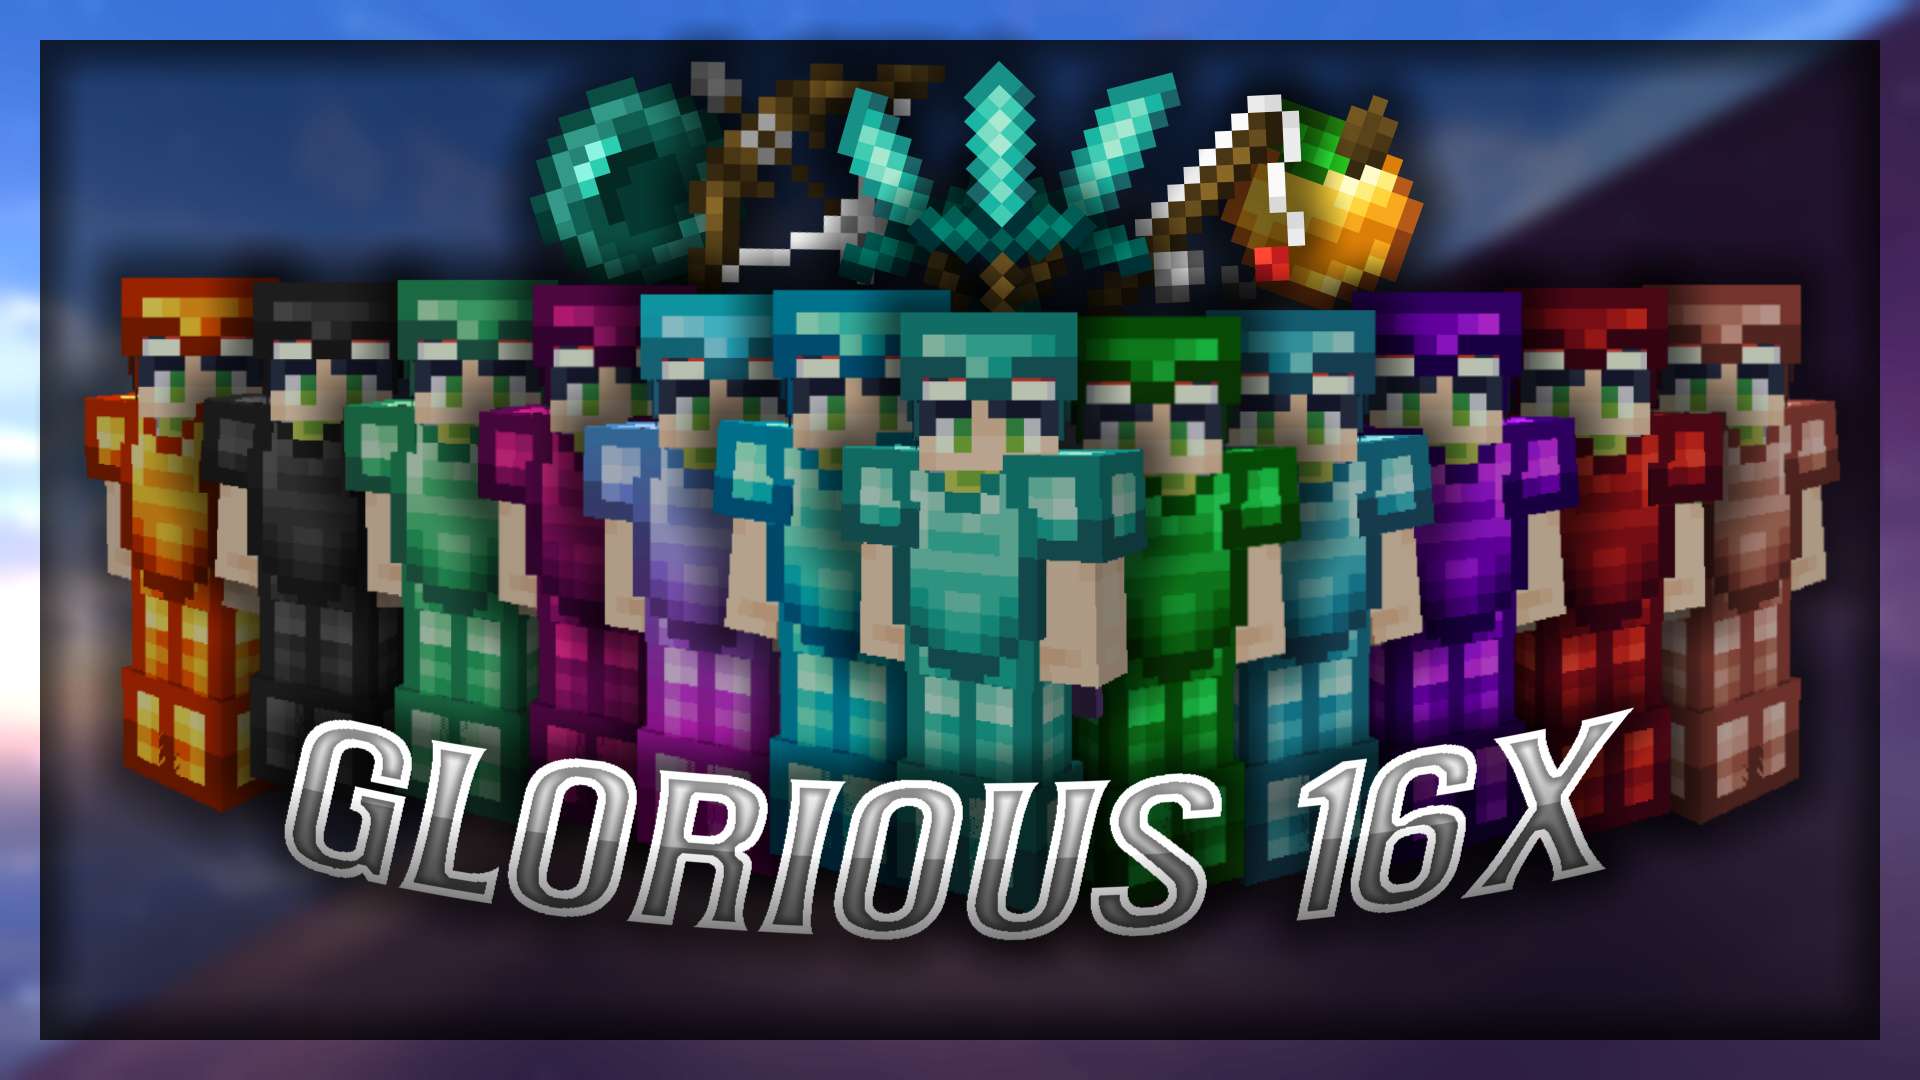 (open zip with WinRAR) Glorious - Green 16x by Mek on PvPRP